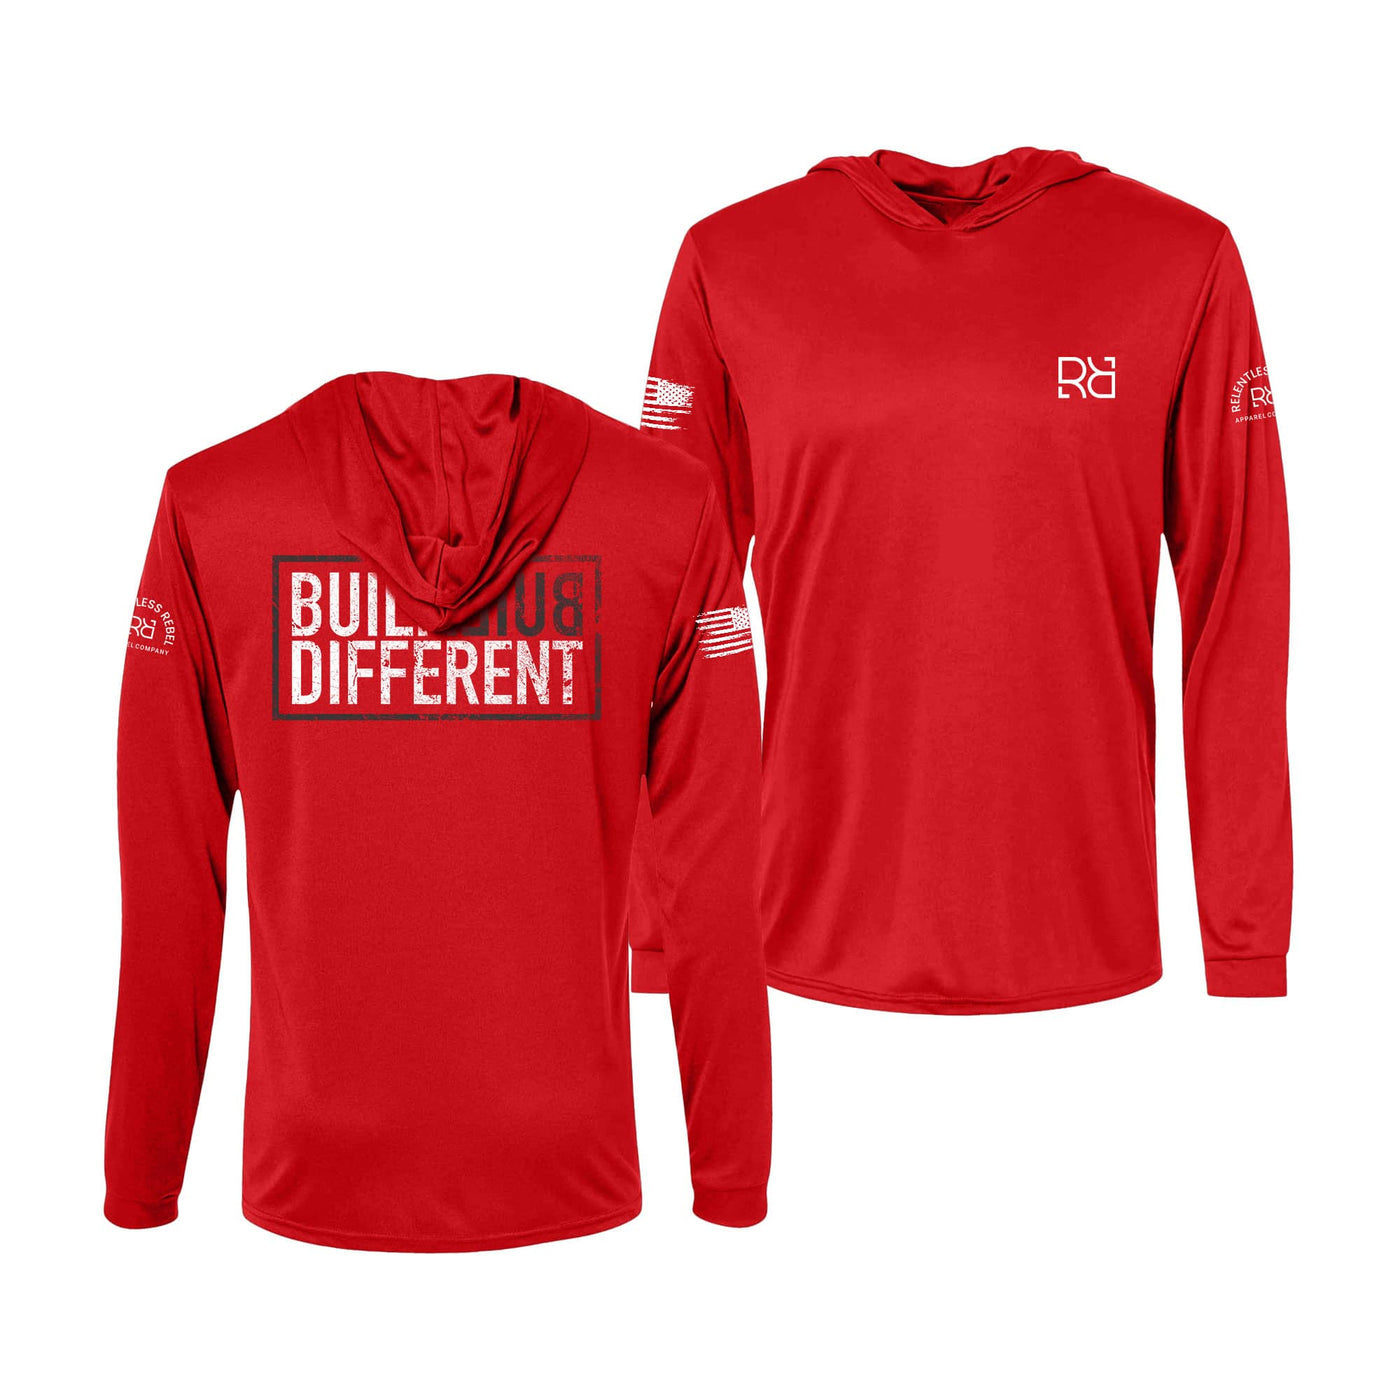 Built Different | Men's Dry Fit Hooded Long Sleeve | UPF50 Rebel Red